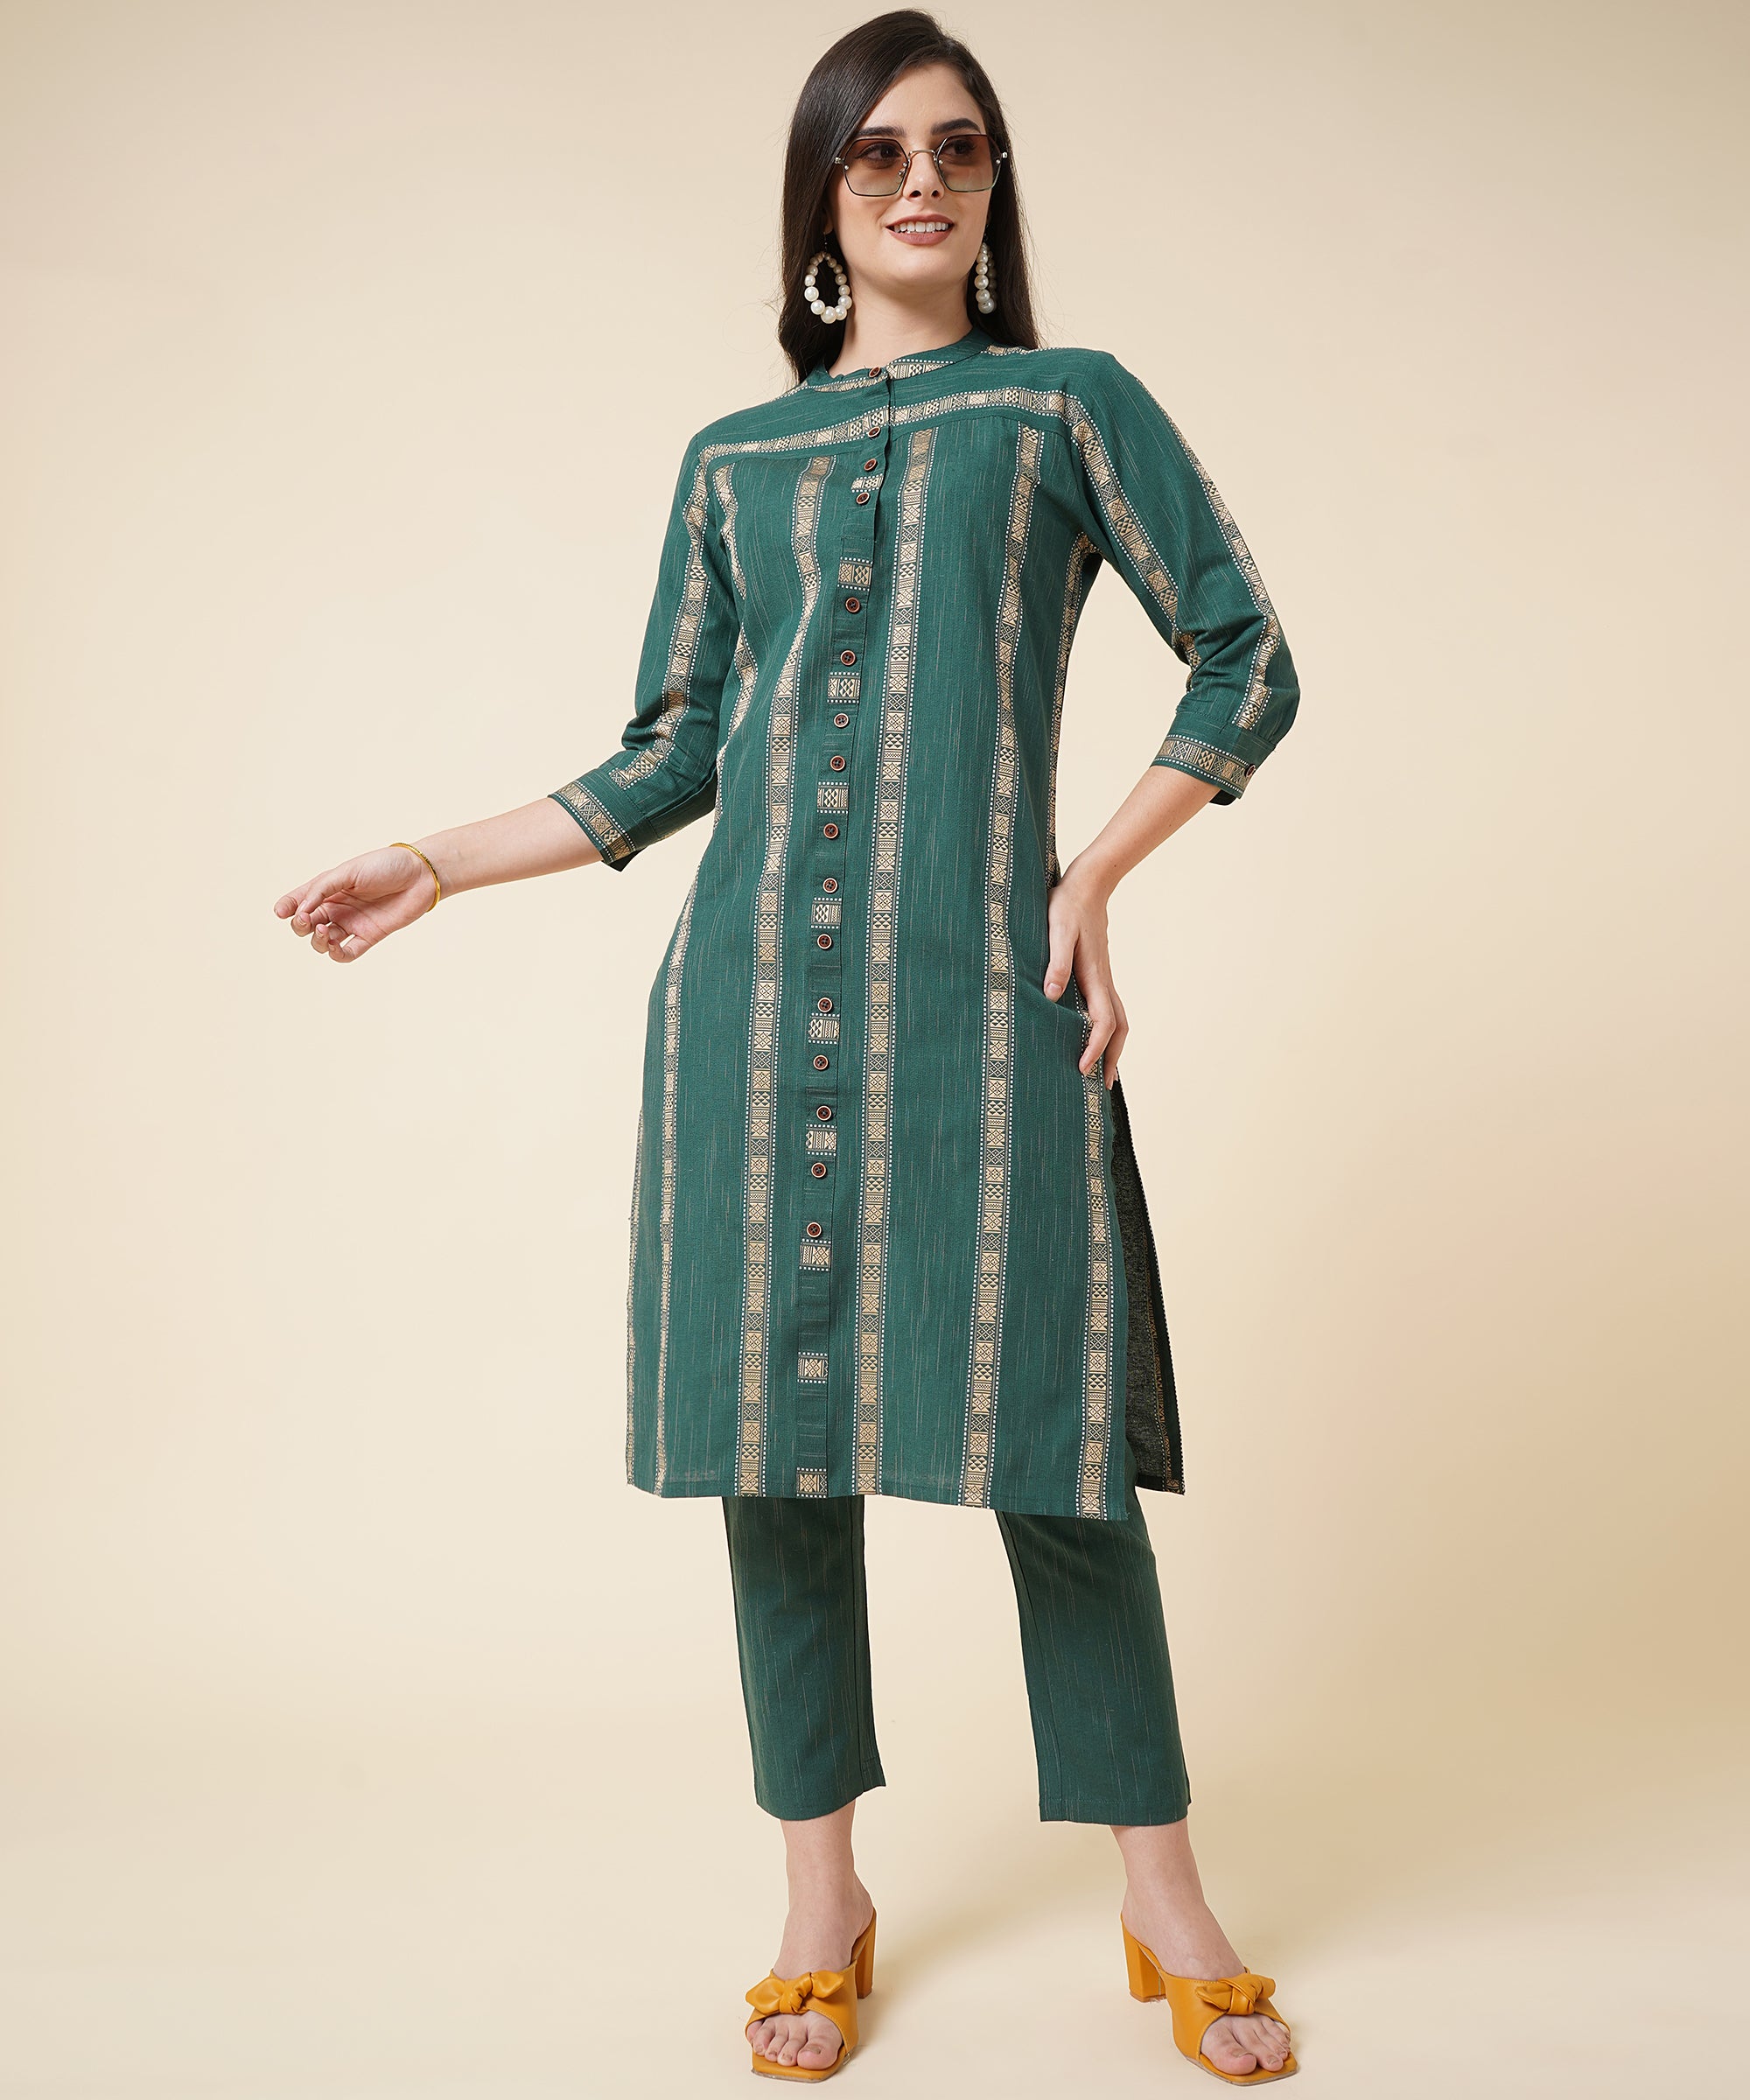 Gold intricate ogee pattern & stone & beads embroideried full-hand kurta  with contrast patiala-style pants